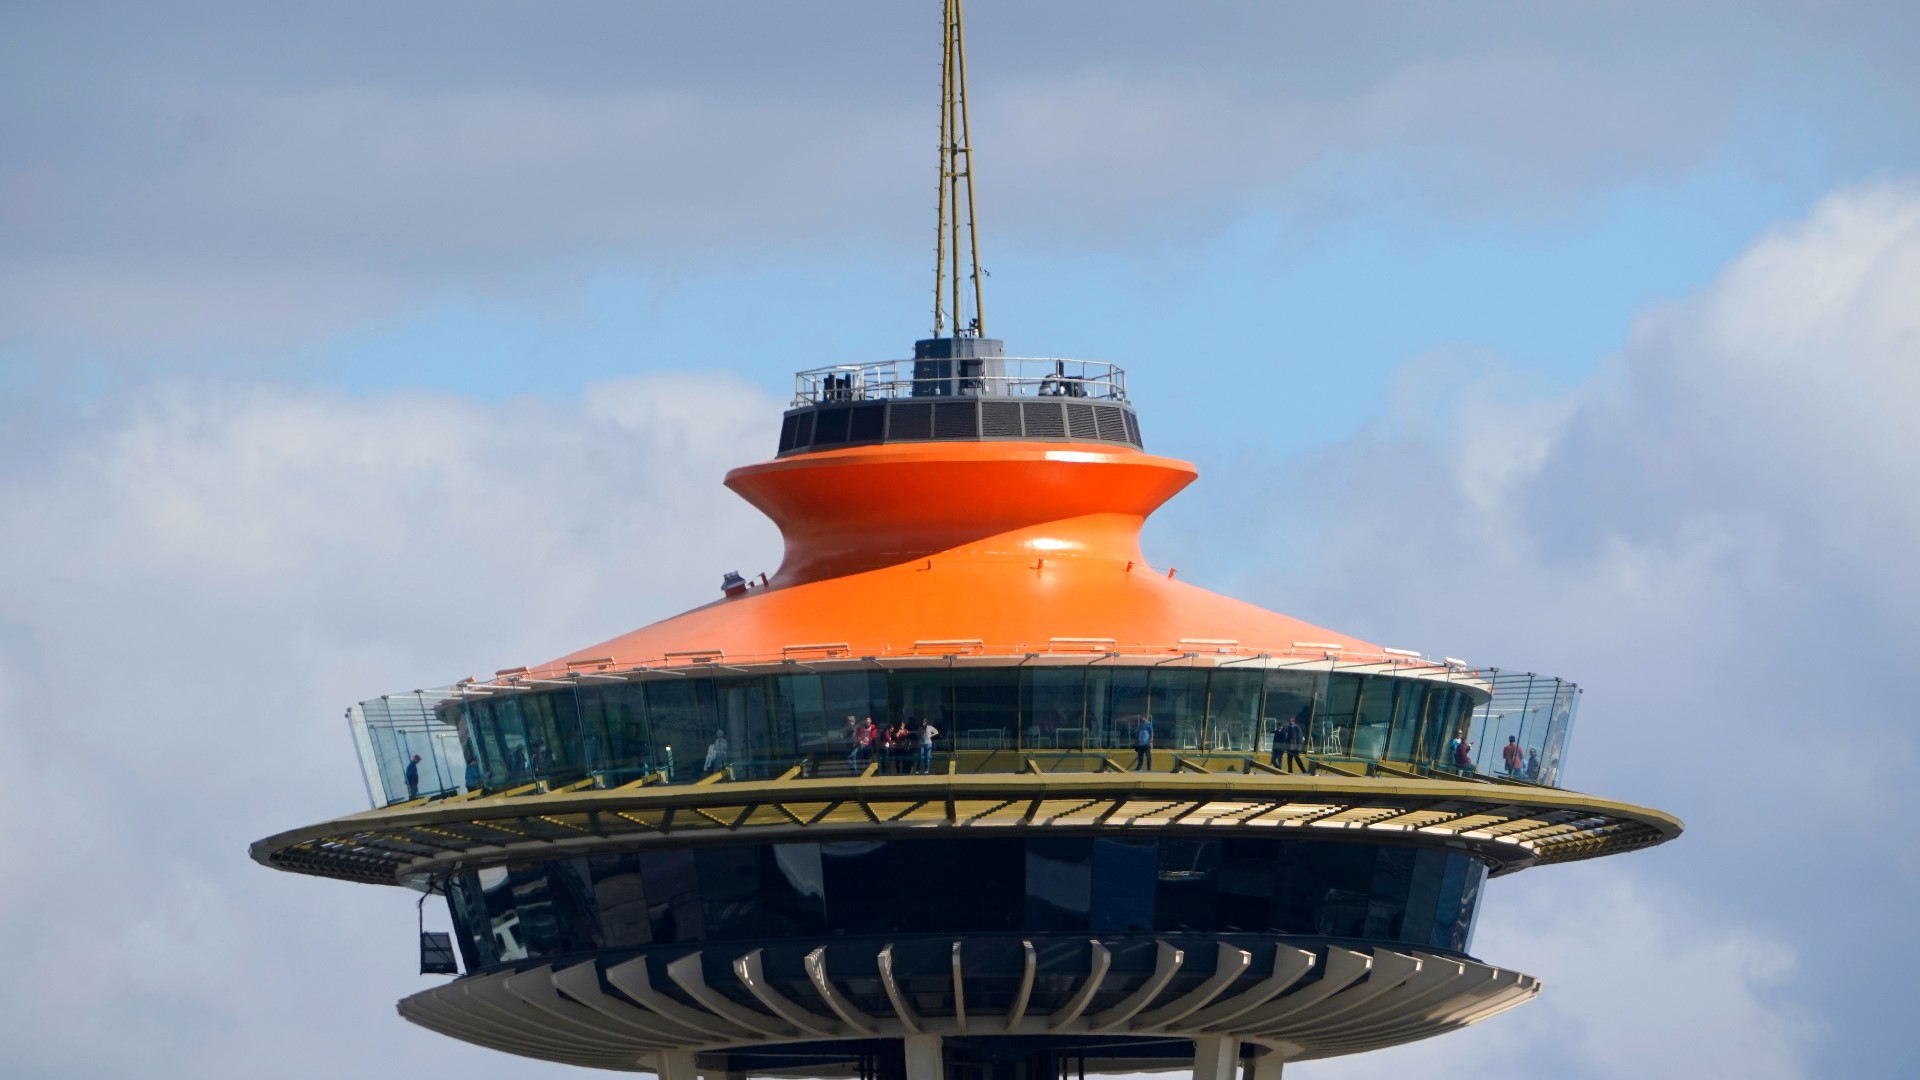 The Space Needle is returning to "Astronaut White" after it was painted its original "Galaxy Gold" for its 60th-anniversary celebration last year.